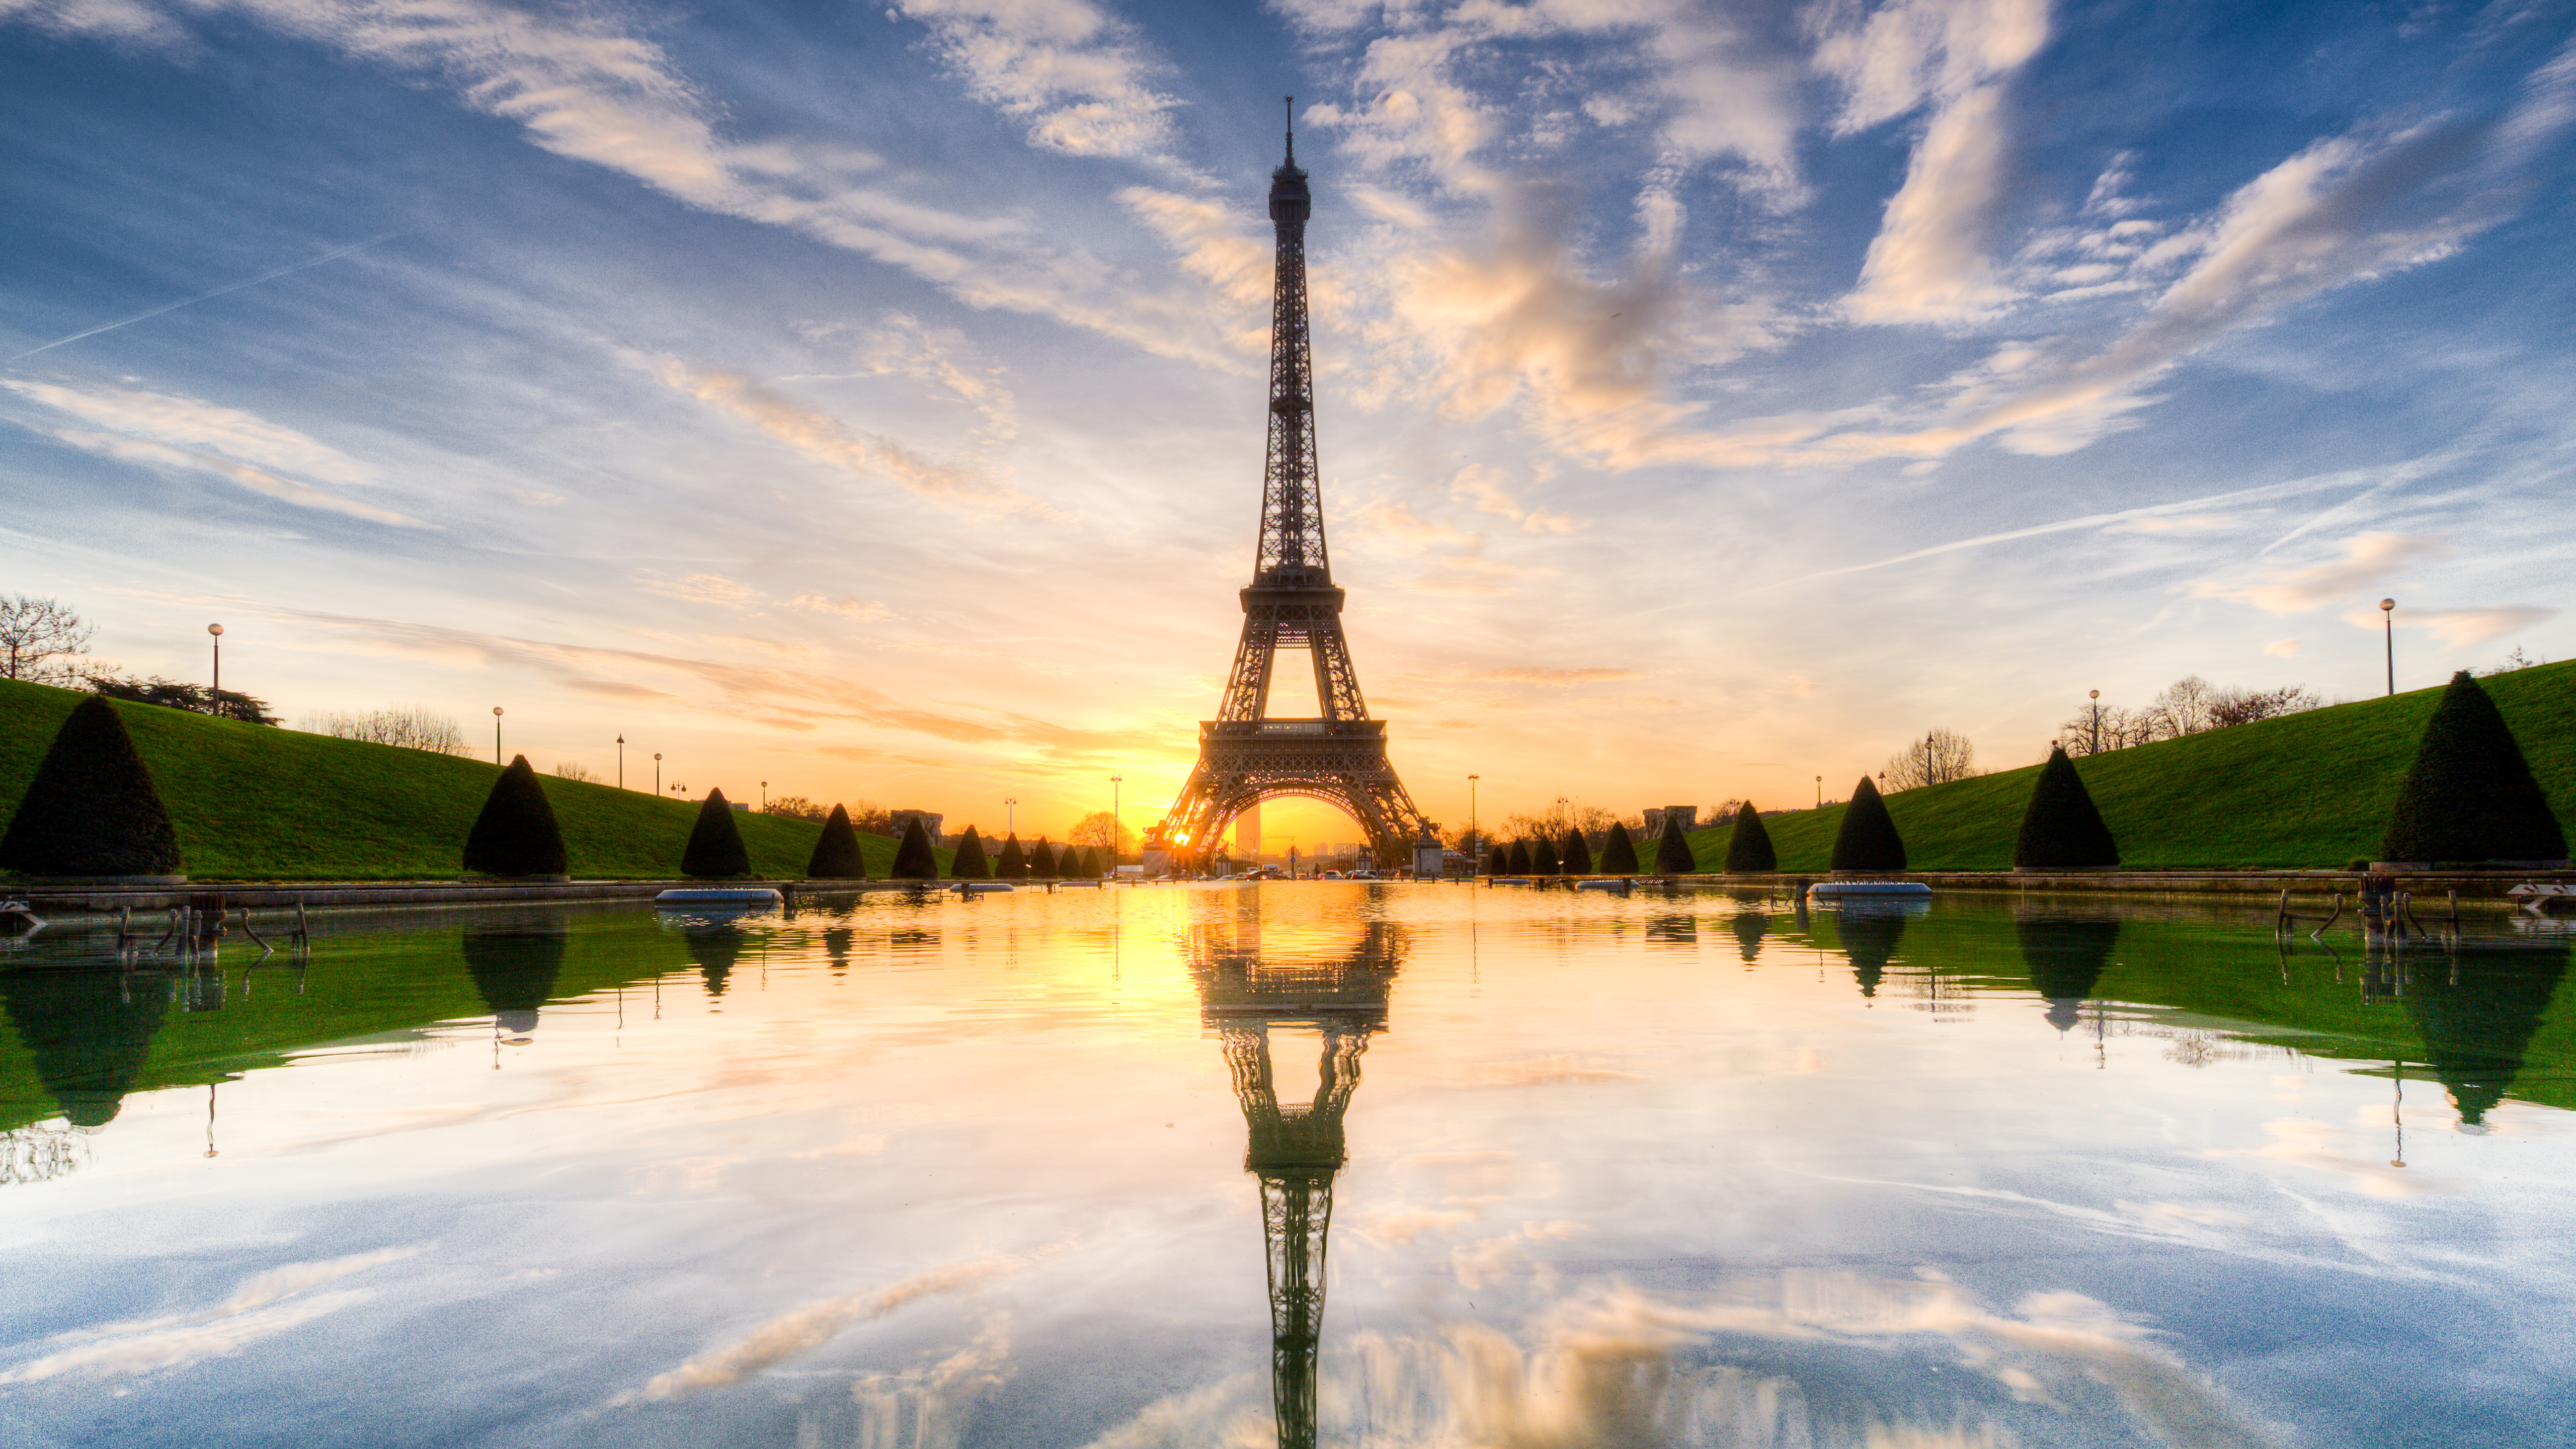 Eiffel Tower And Reflection On Water With Blue Sky And Clouds Wallpaper During Sunrise K K HD Travel